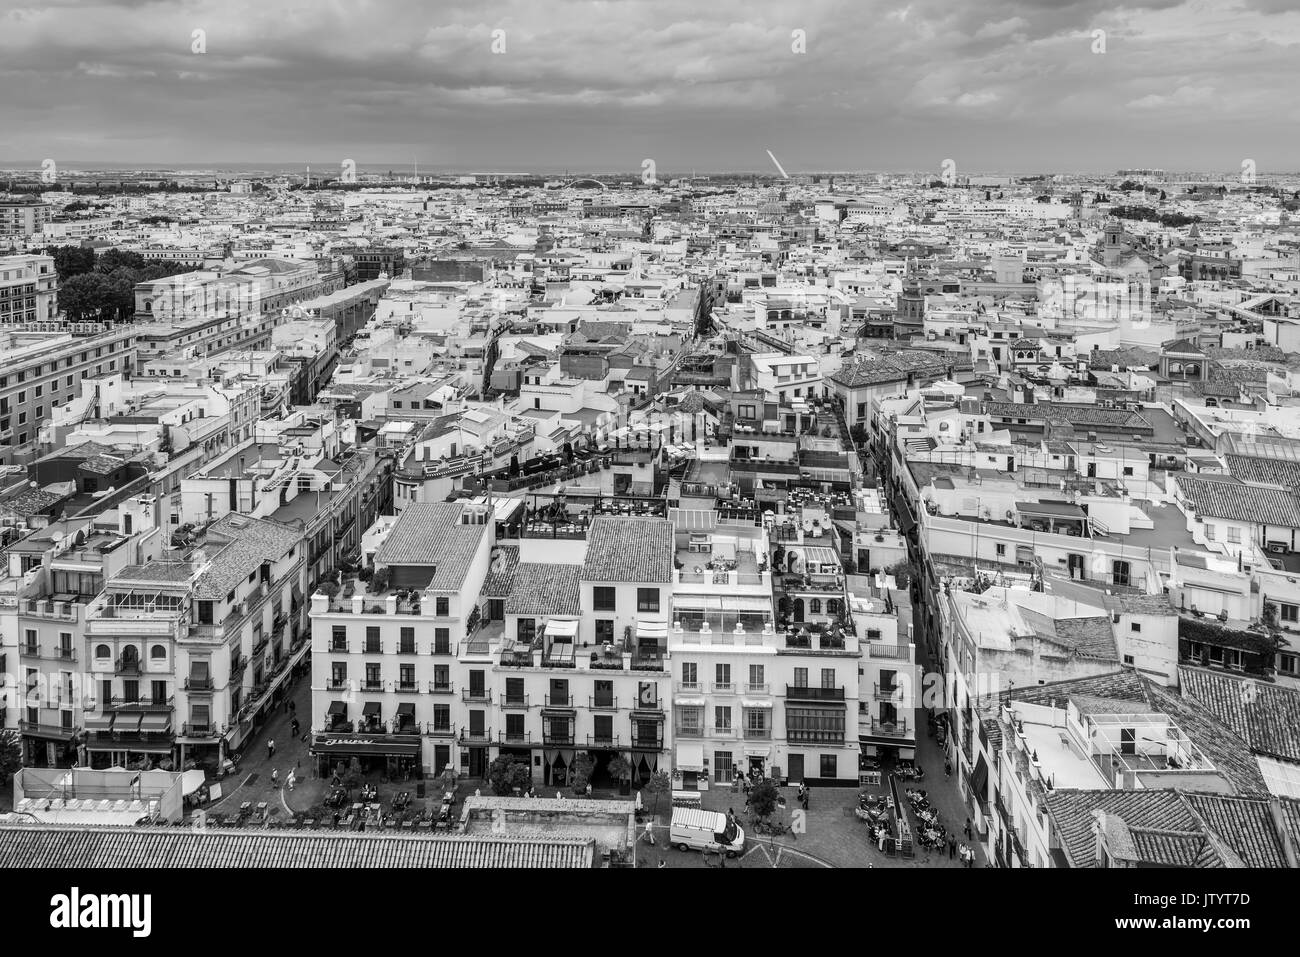 Seville, Spain - May 20, 2014: Aerial view of Sevilla, Spain, taken from Giralda tower in cloudy weather. Black and white photography. Stock Photo